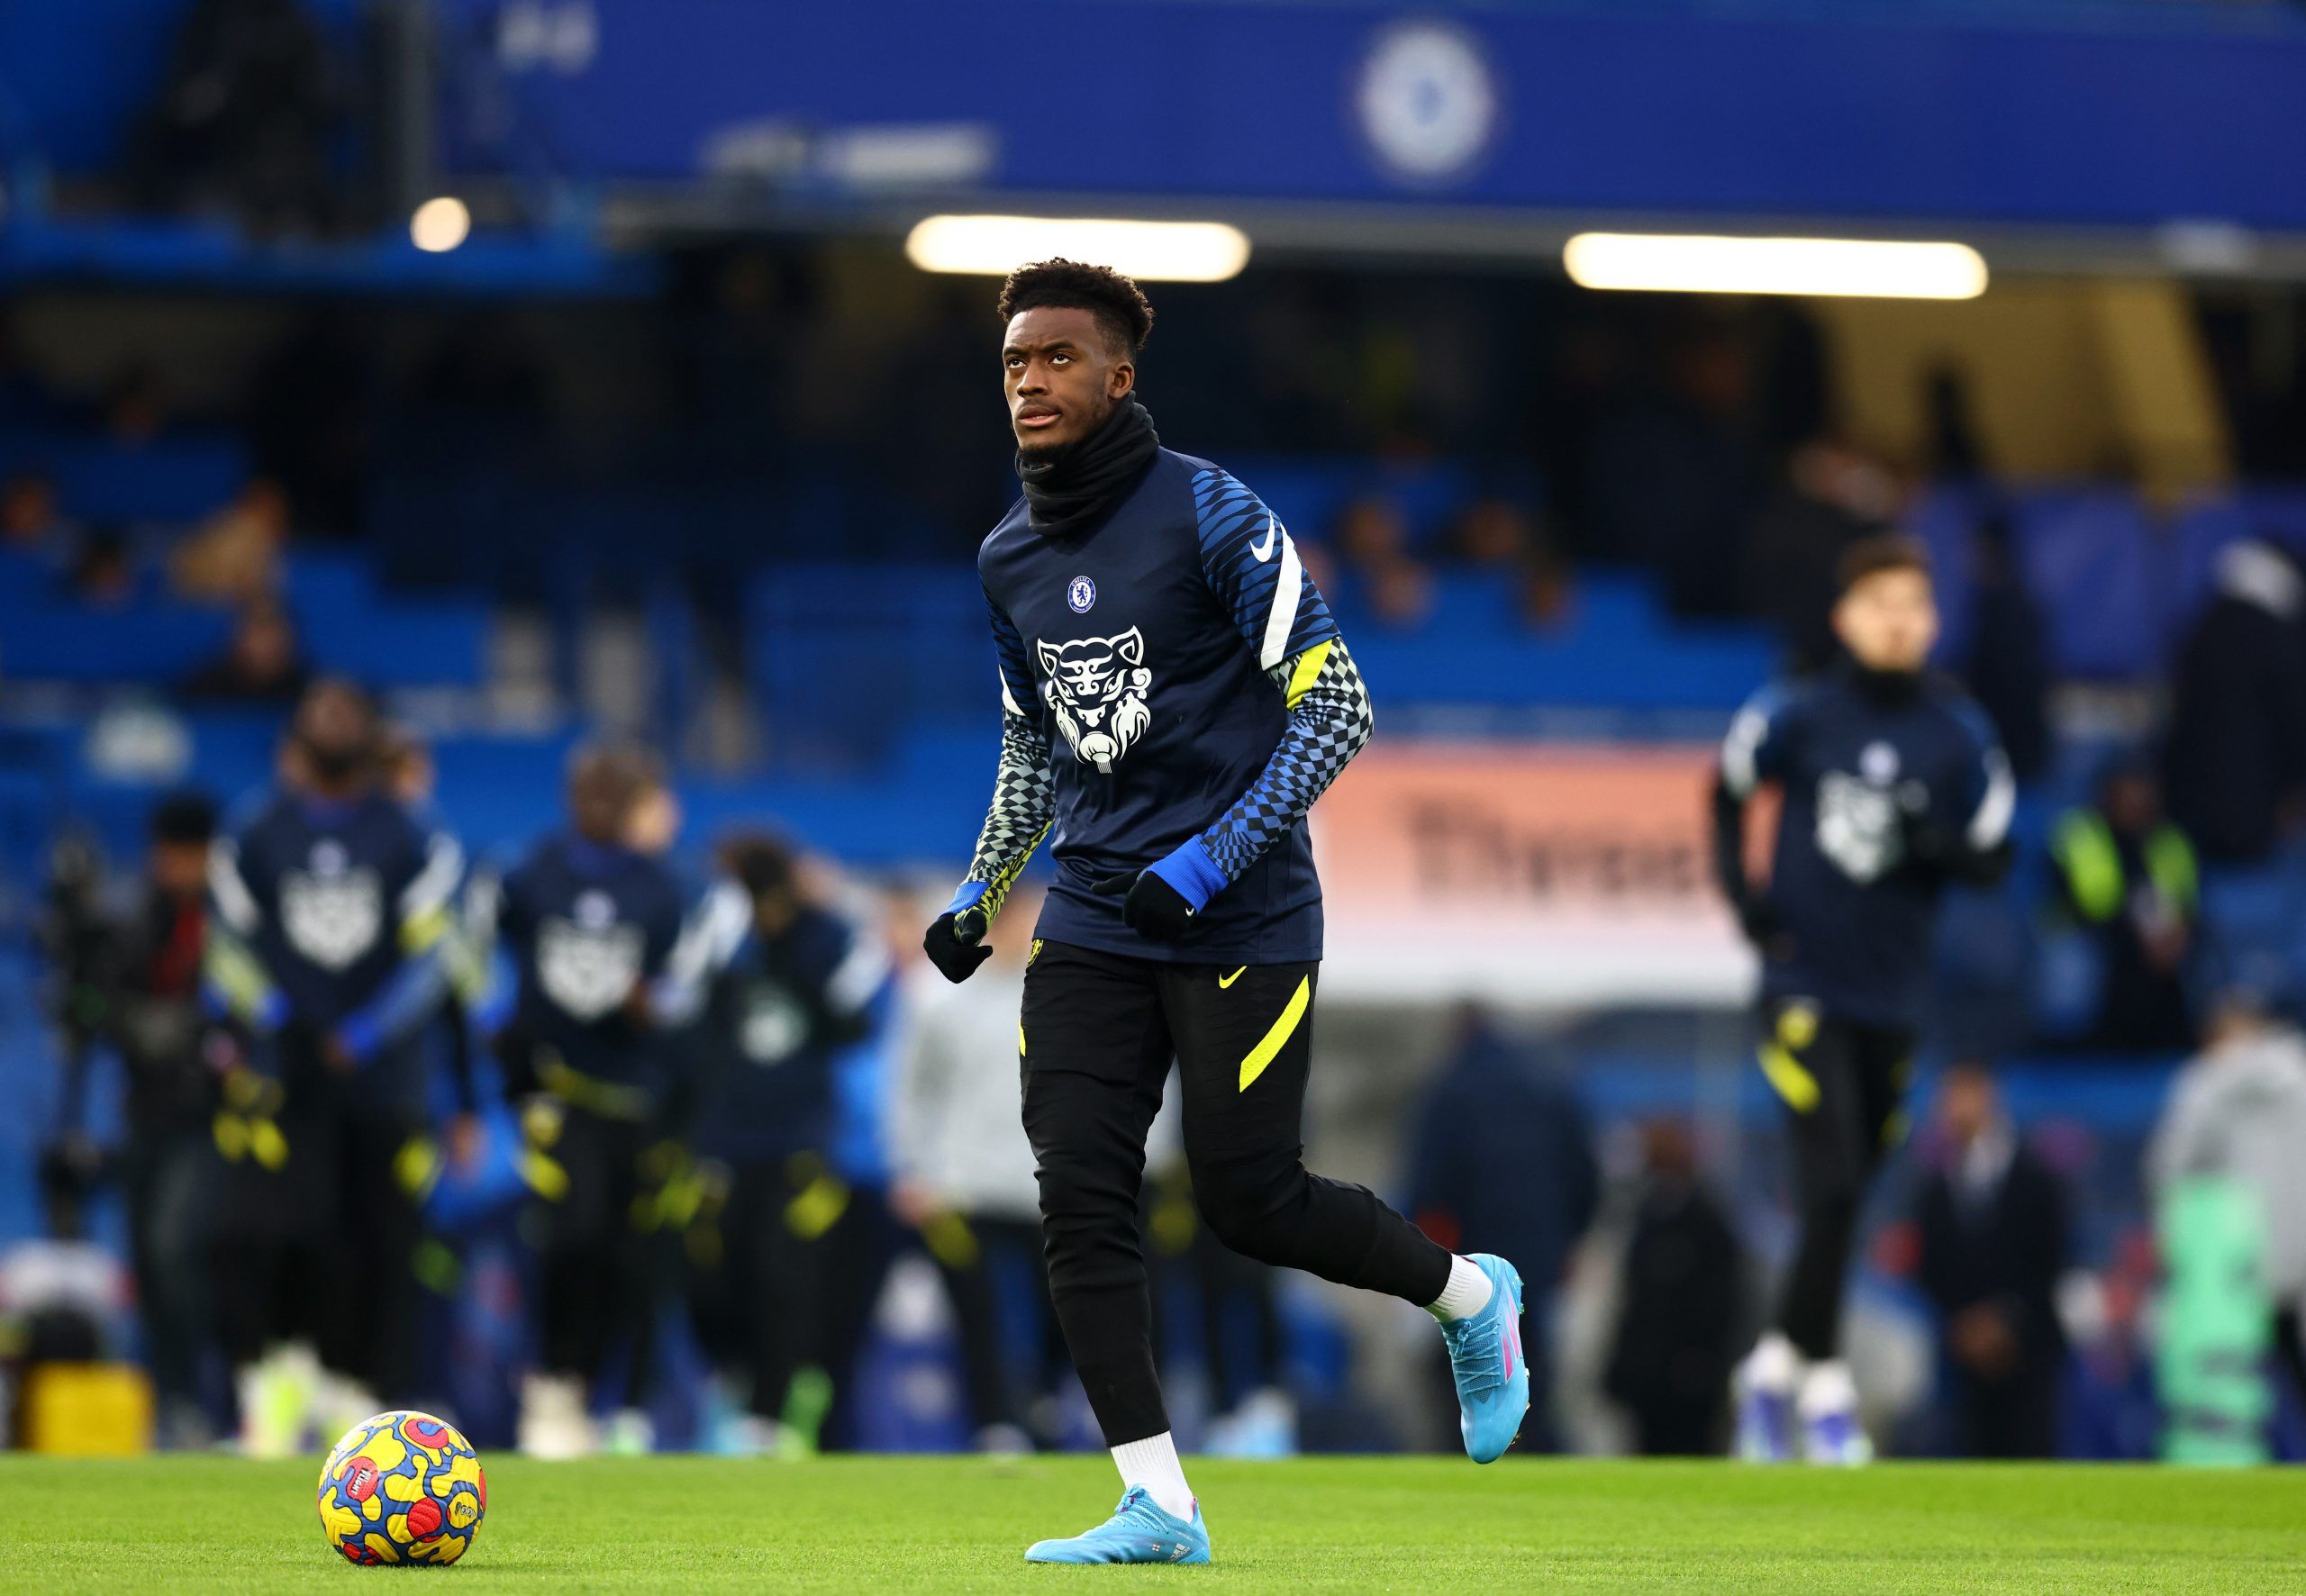 Soccer Football - Premier League - Chelsea v Tottenham Hotspur - Stamford Bridge, London, Britain - January 23, 2022 Chelsea's Callum Hudson-Odoi during the warm up before the match REUTERS/David Klein EDITORIAL USE ONLY. No use with unauthorized audio, video, data, fixture lists, club/league logos or 'live' services. Online in-match use limited to 75 images, no video emulation. No use in betting, games or single club /league/player publications.  Please contact your account representative for f